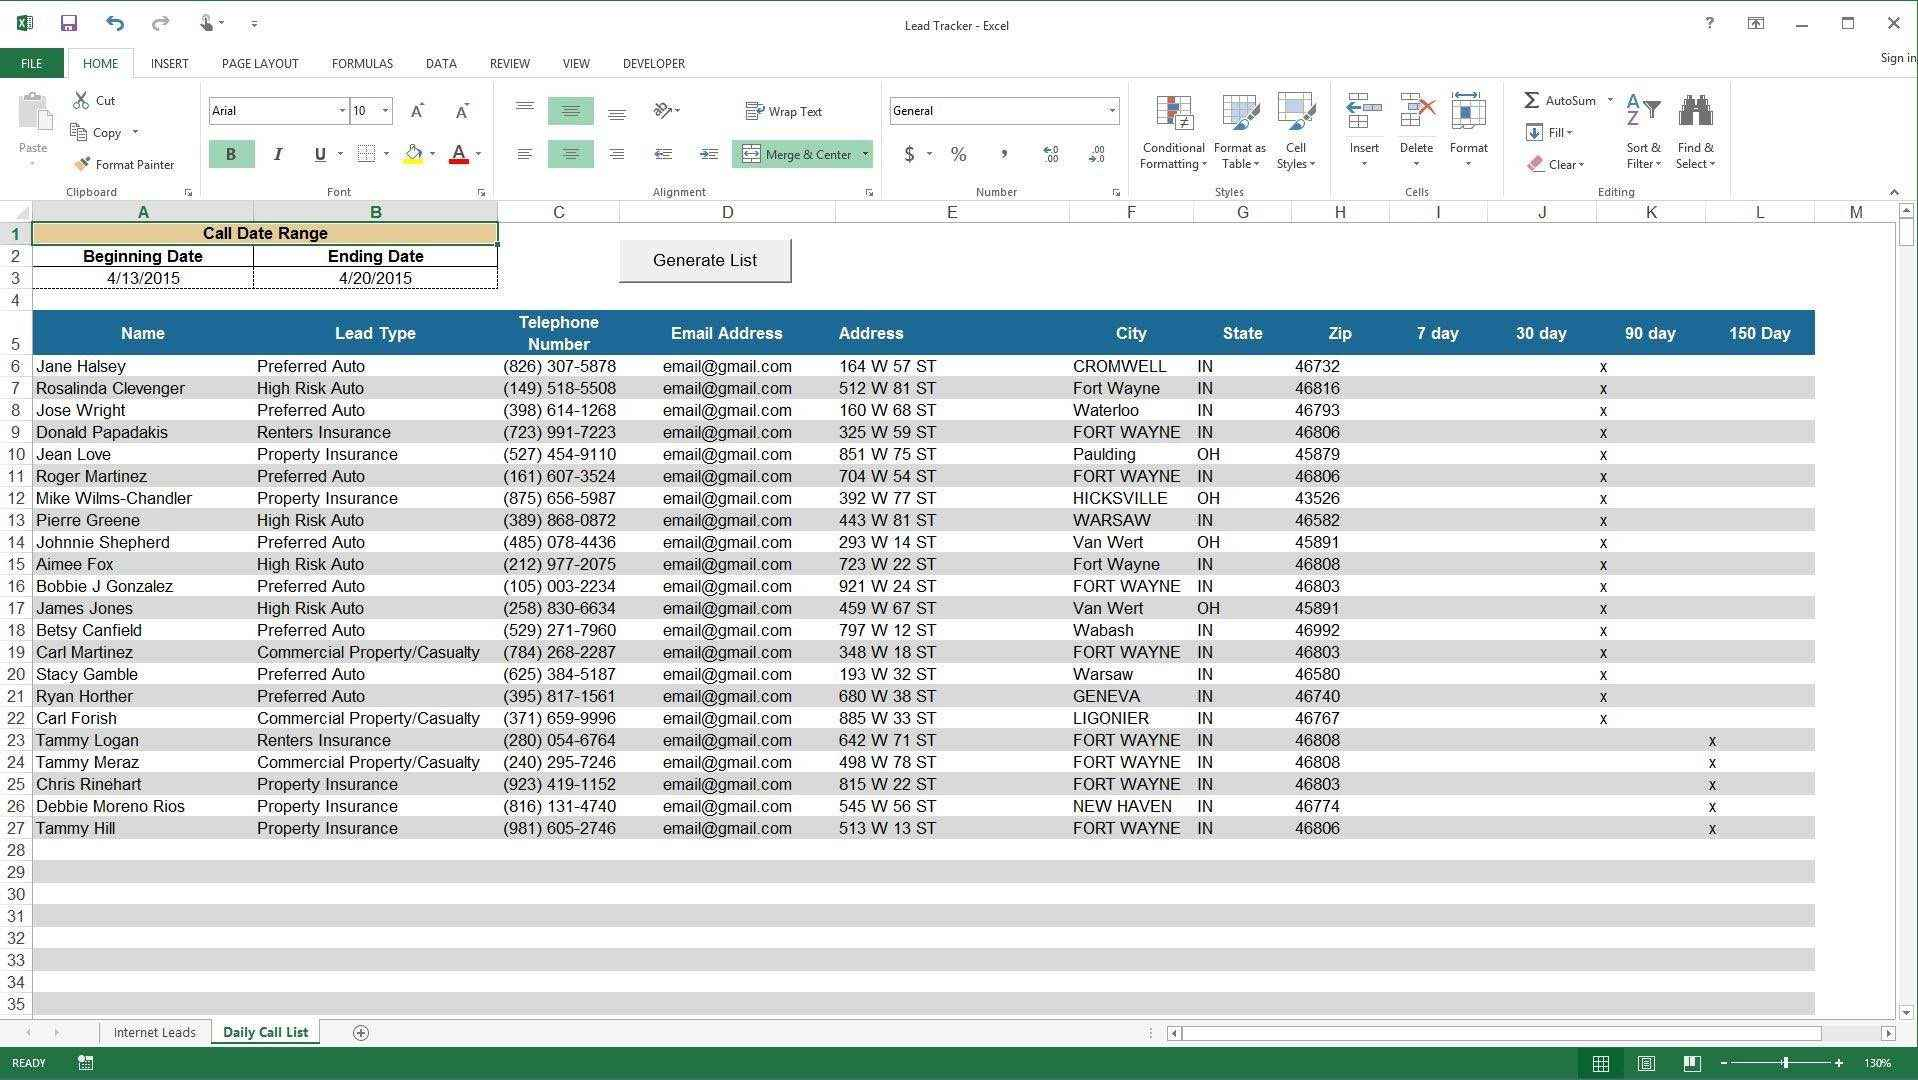 Real Estate Lead Tracking Spreadsheet And Real Estate Lead Throughout Lead Generation Tracking Spreadsheet